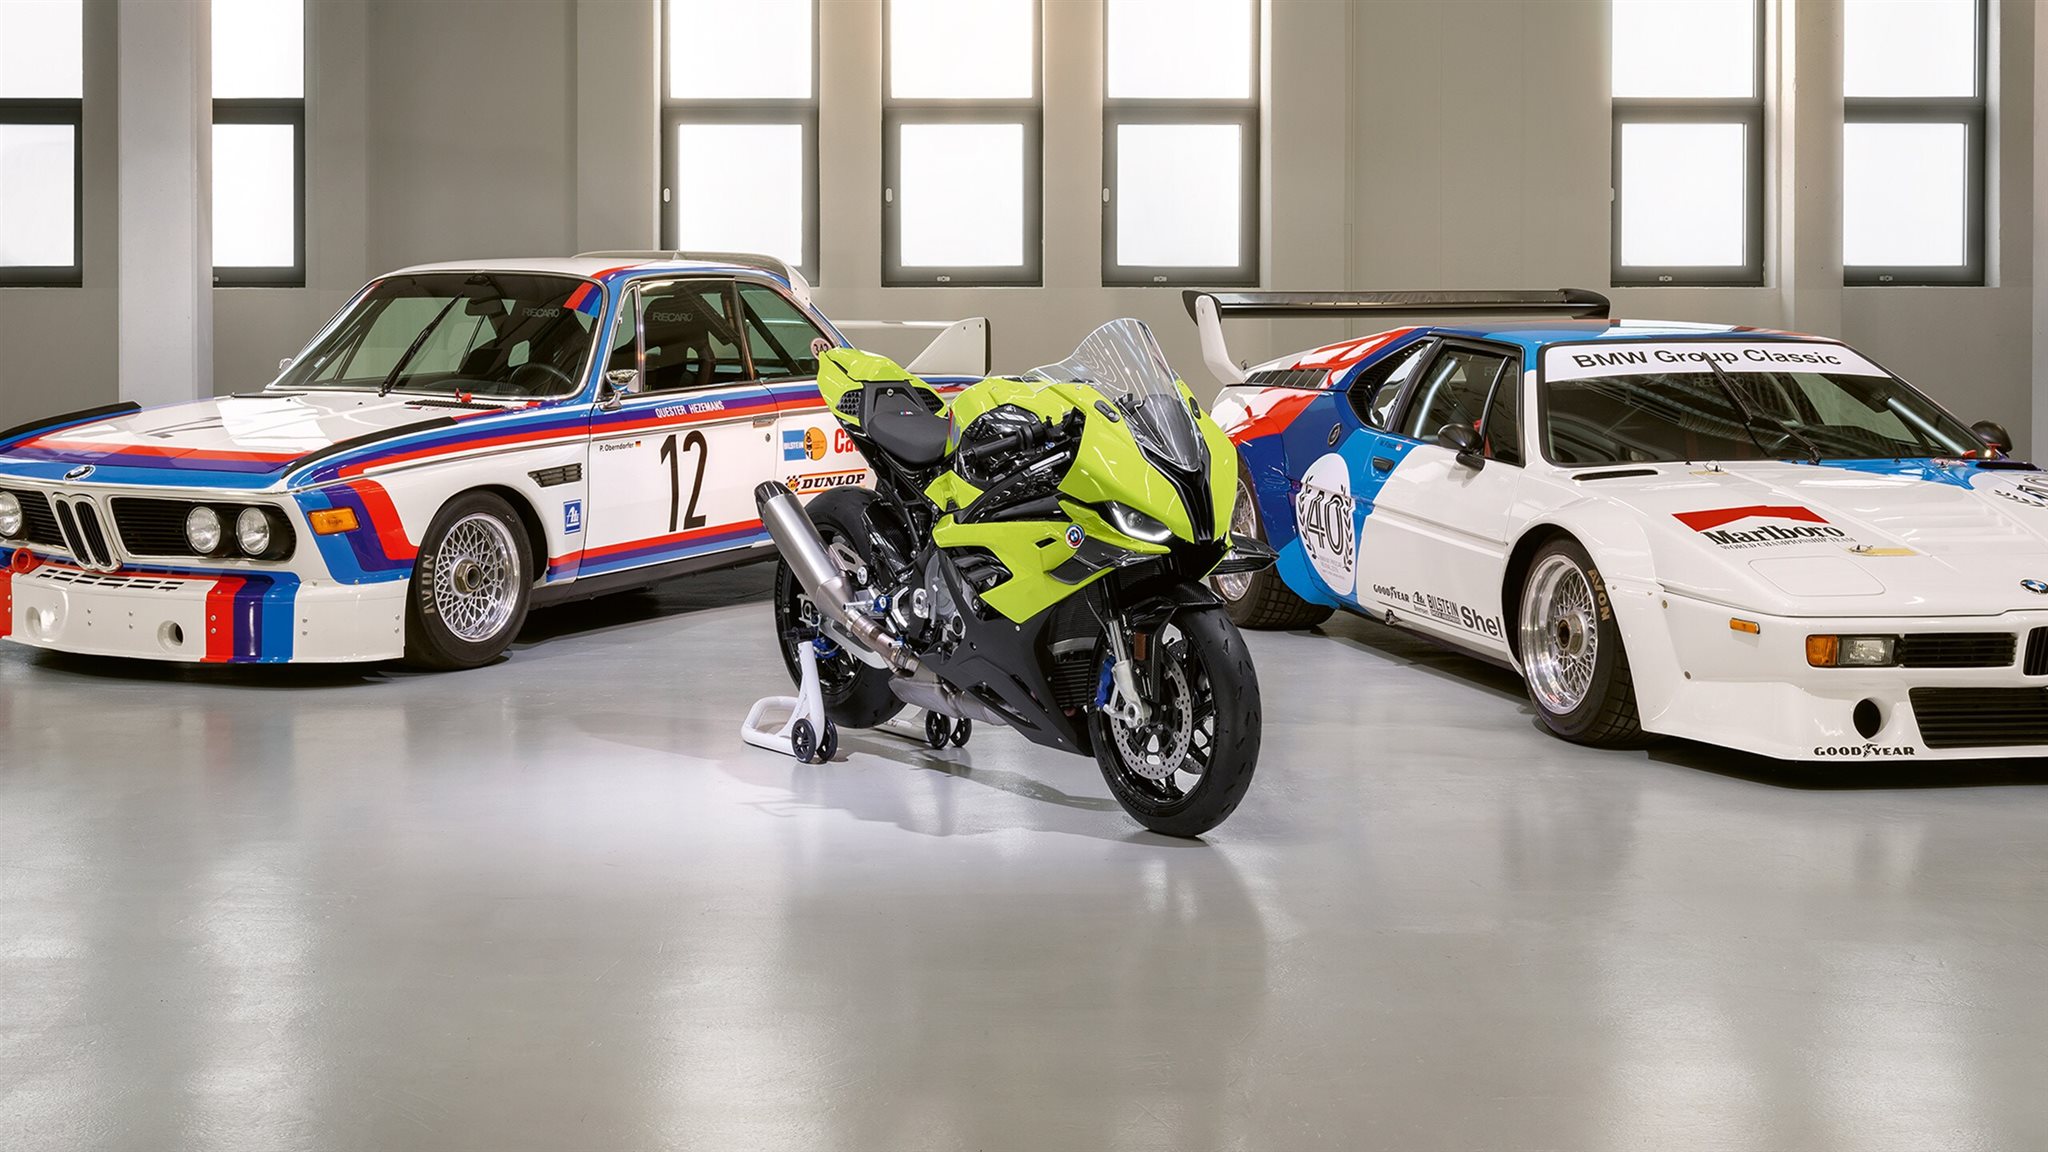 History, tradition and unmistakable BMW M DNA combined in an exclusive bike